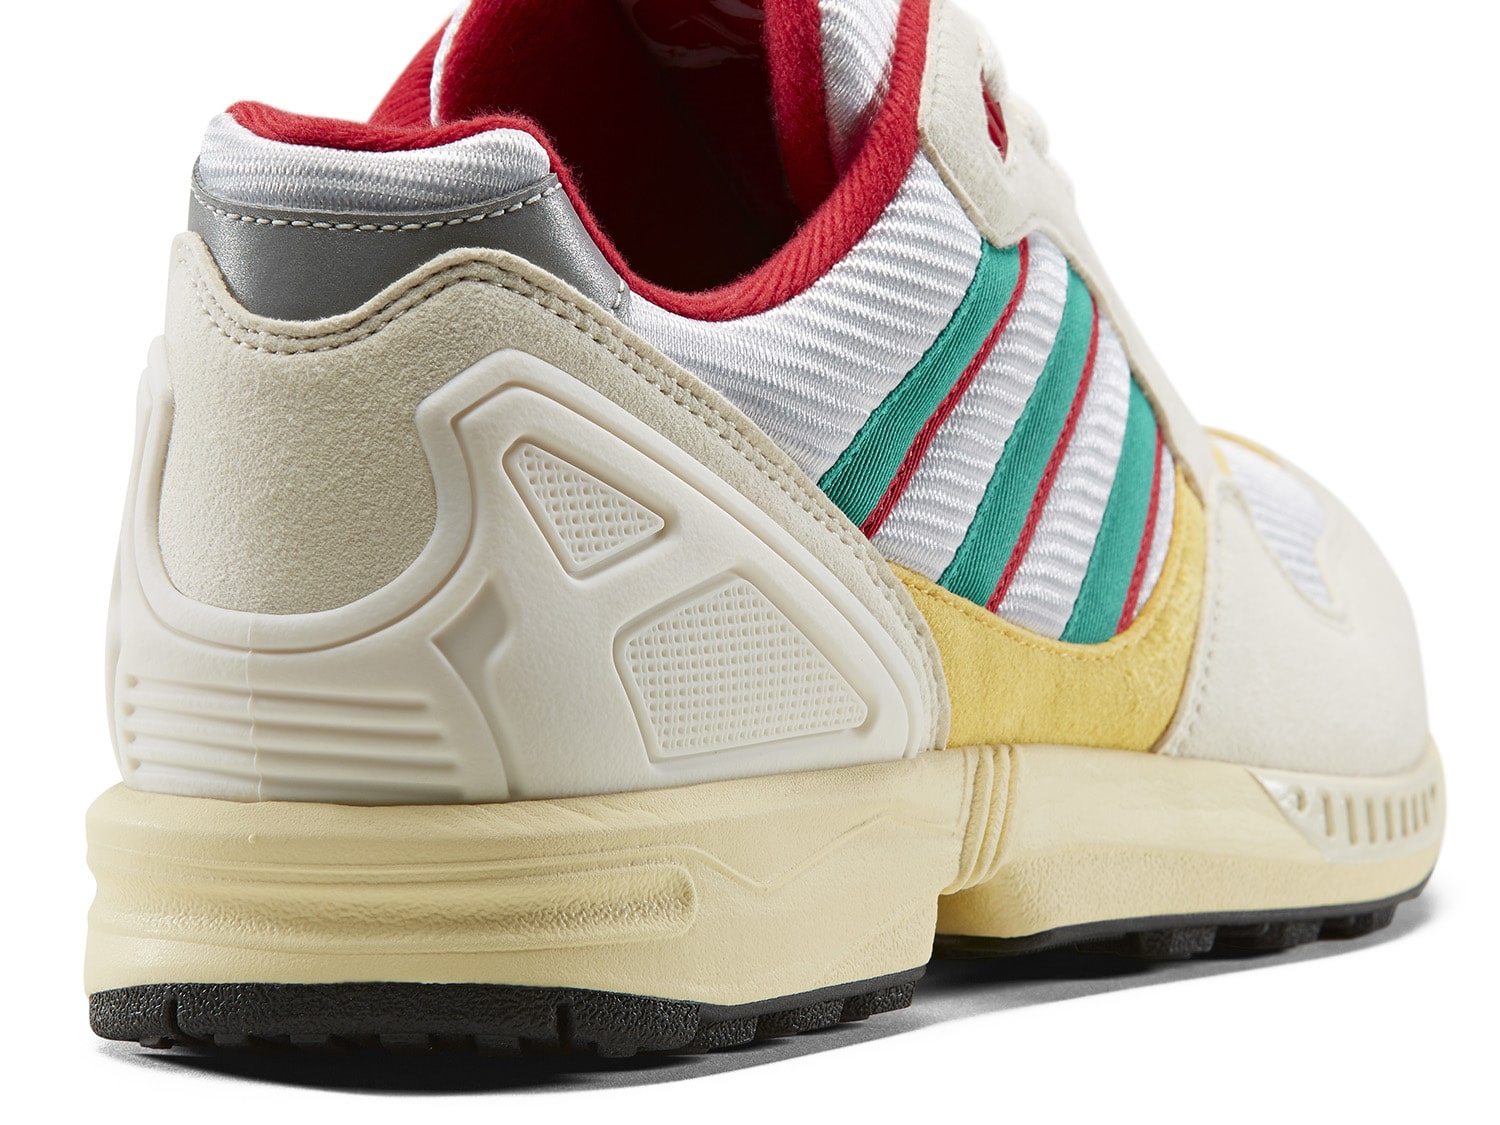 adidas ZX 6000 OG 30 years of Torsion 6